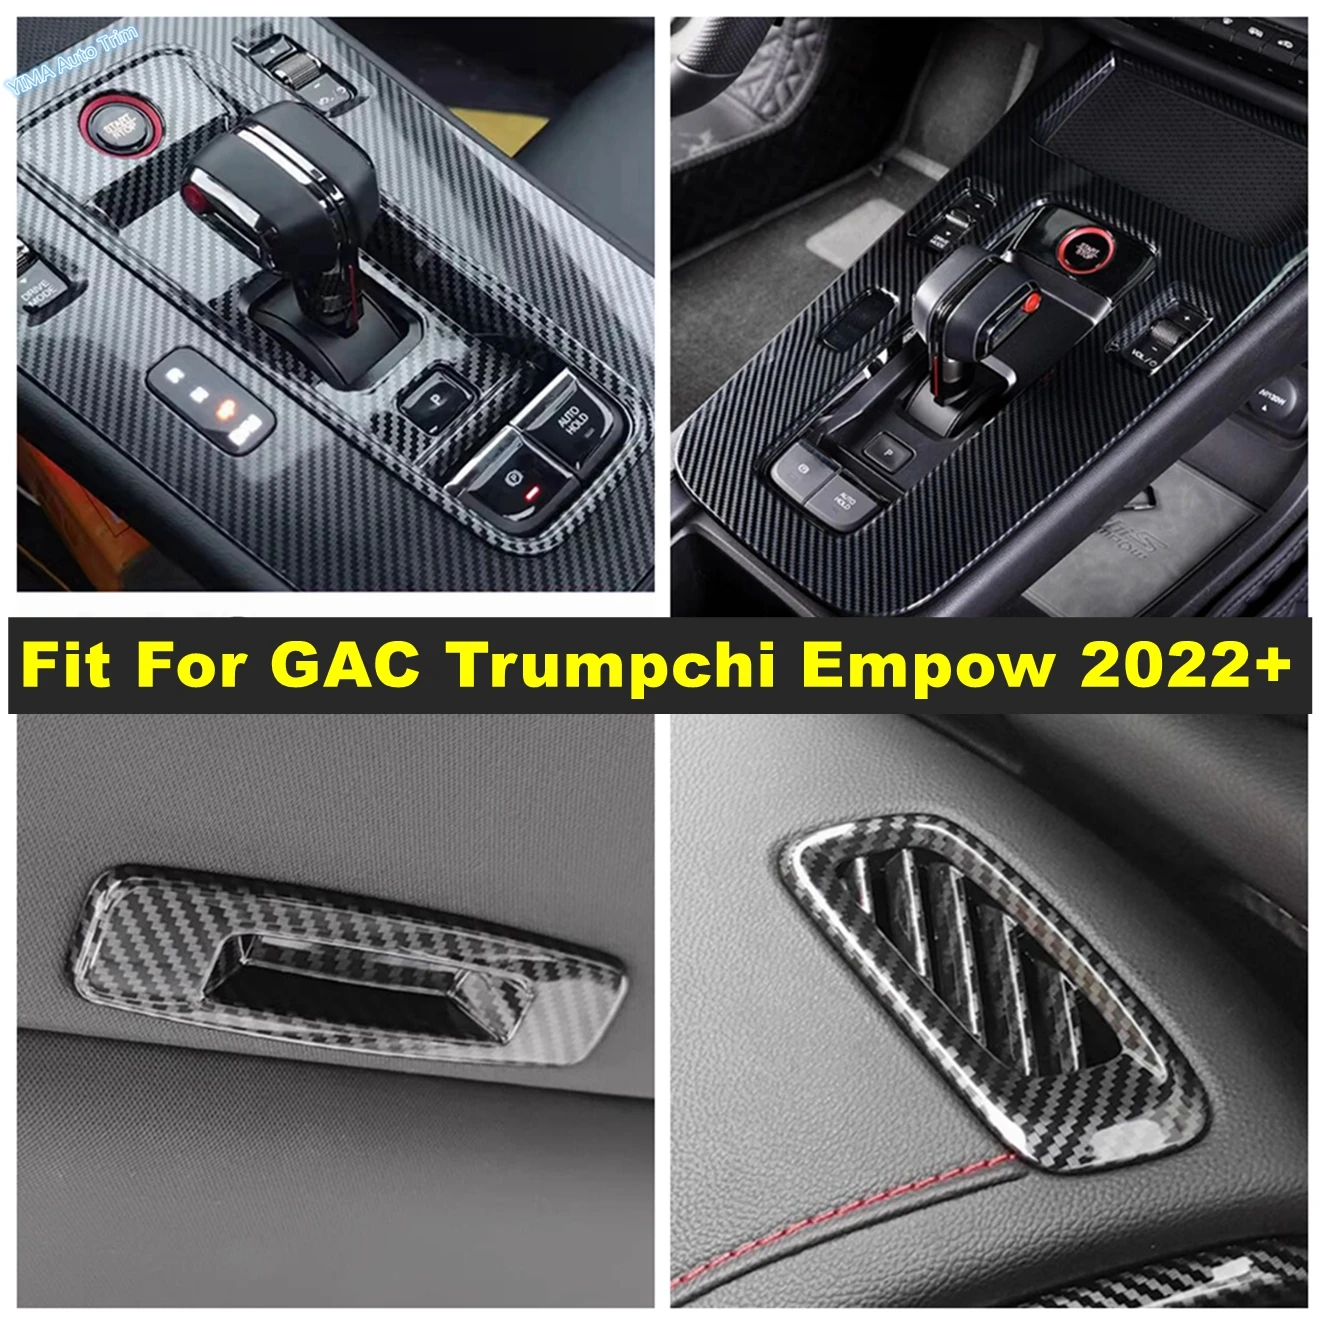 

Shift Gear Panel / Sunroof Switch Sequin / Upper Air Outlet Cover Trim Fit For GAC Trumpchi Empow 2022 2023 Interior Accessories